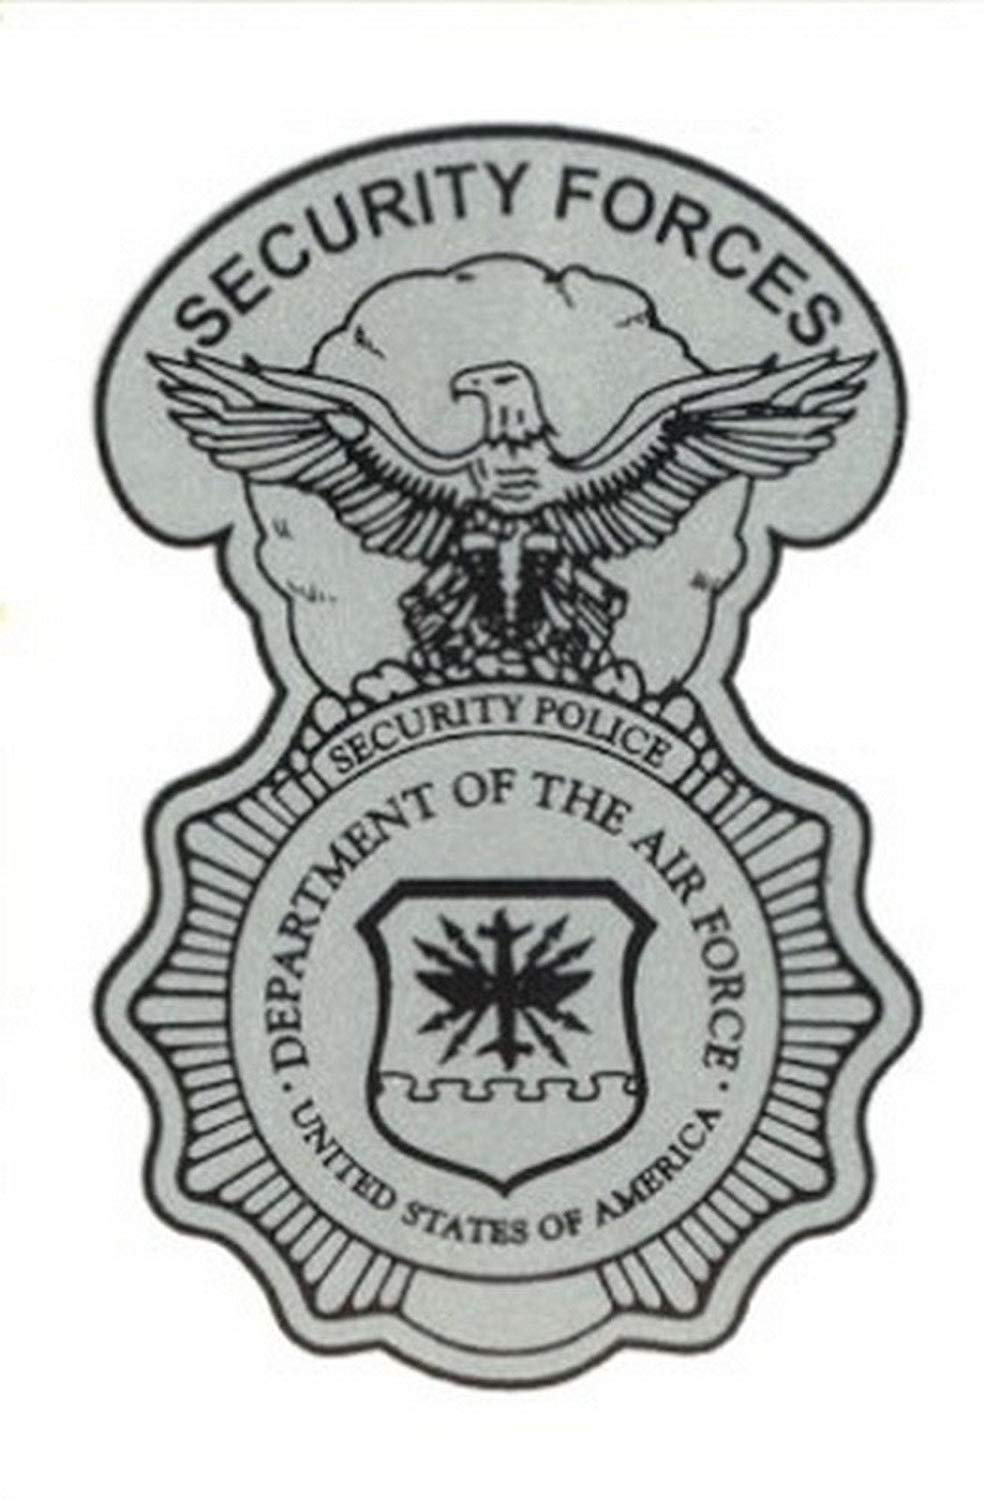 Air Force Security Forces Logo - Amazon.com: Air Force Security Forces Shield Decal Sticker: Automotive